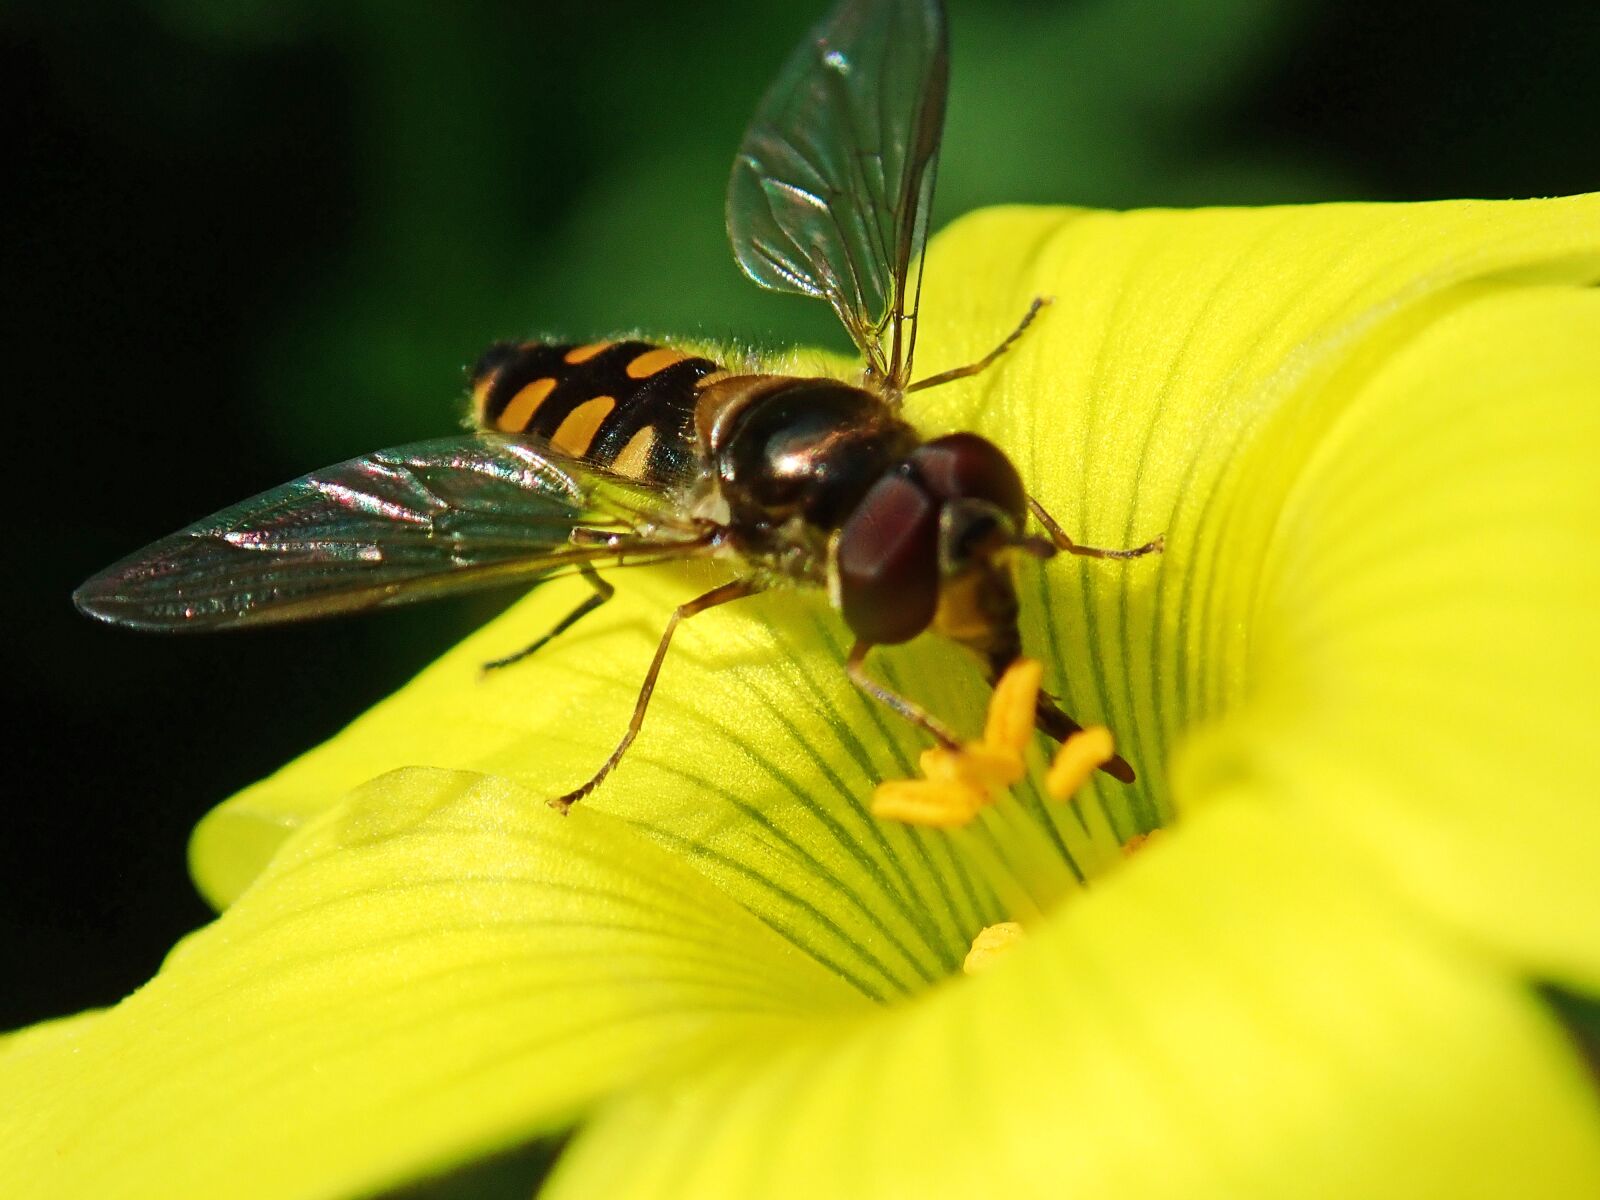 Olympus TG-5 sample photo. Insect, hoverfly, tongue photography